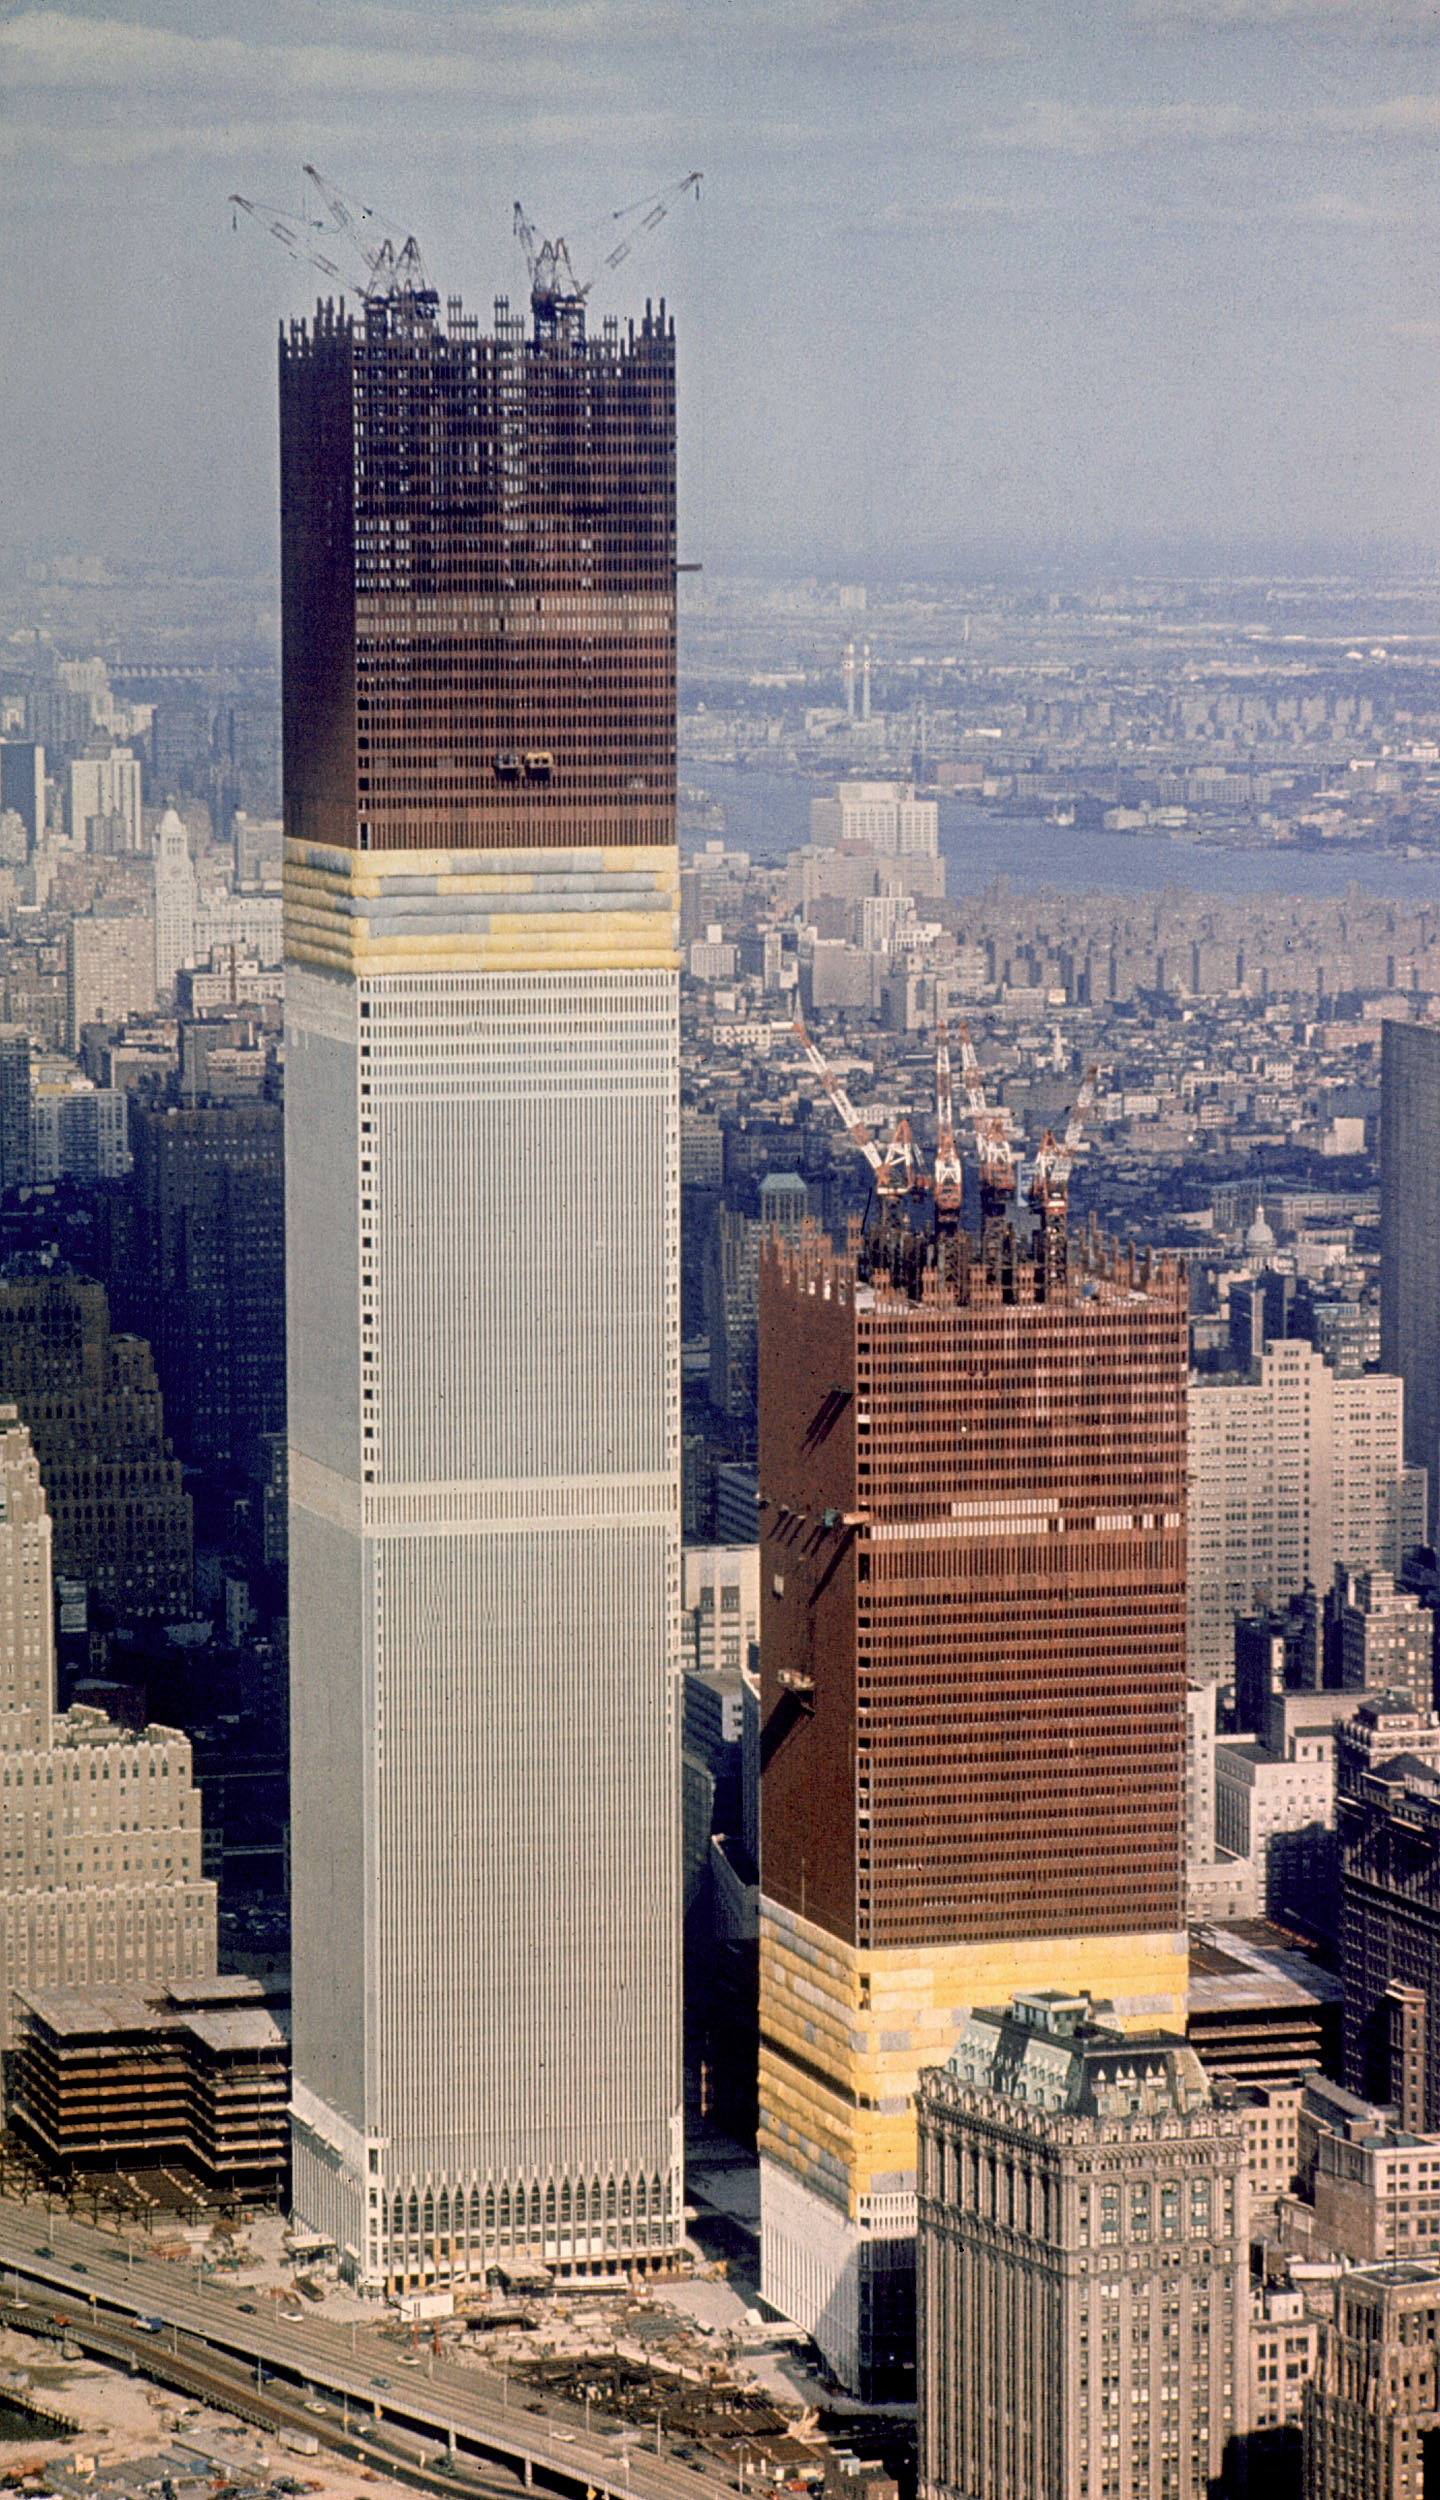 Workers add a new section to the top of the World Trade Center Building in New York, October 23, 1970, making its height some 1,254 feet, four feet taller than the Empire State Building.